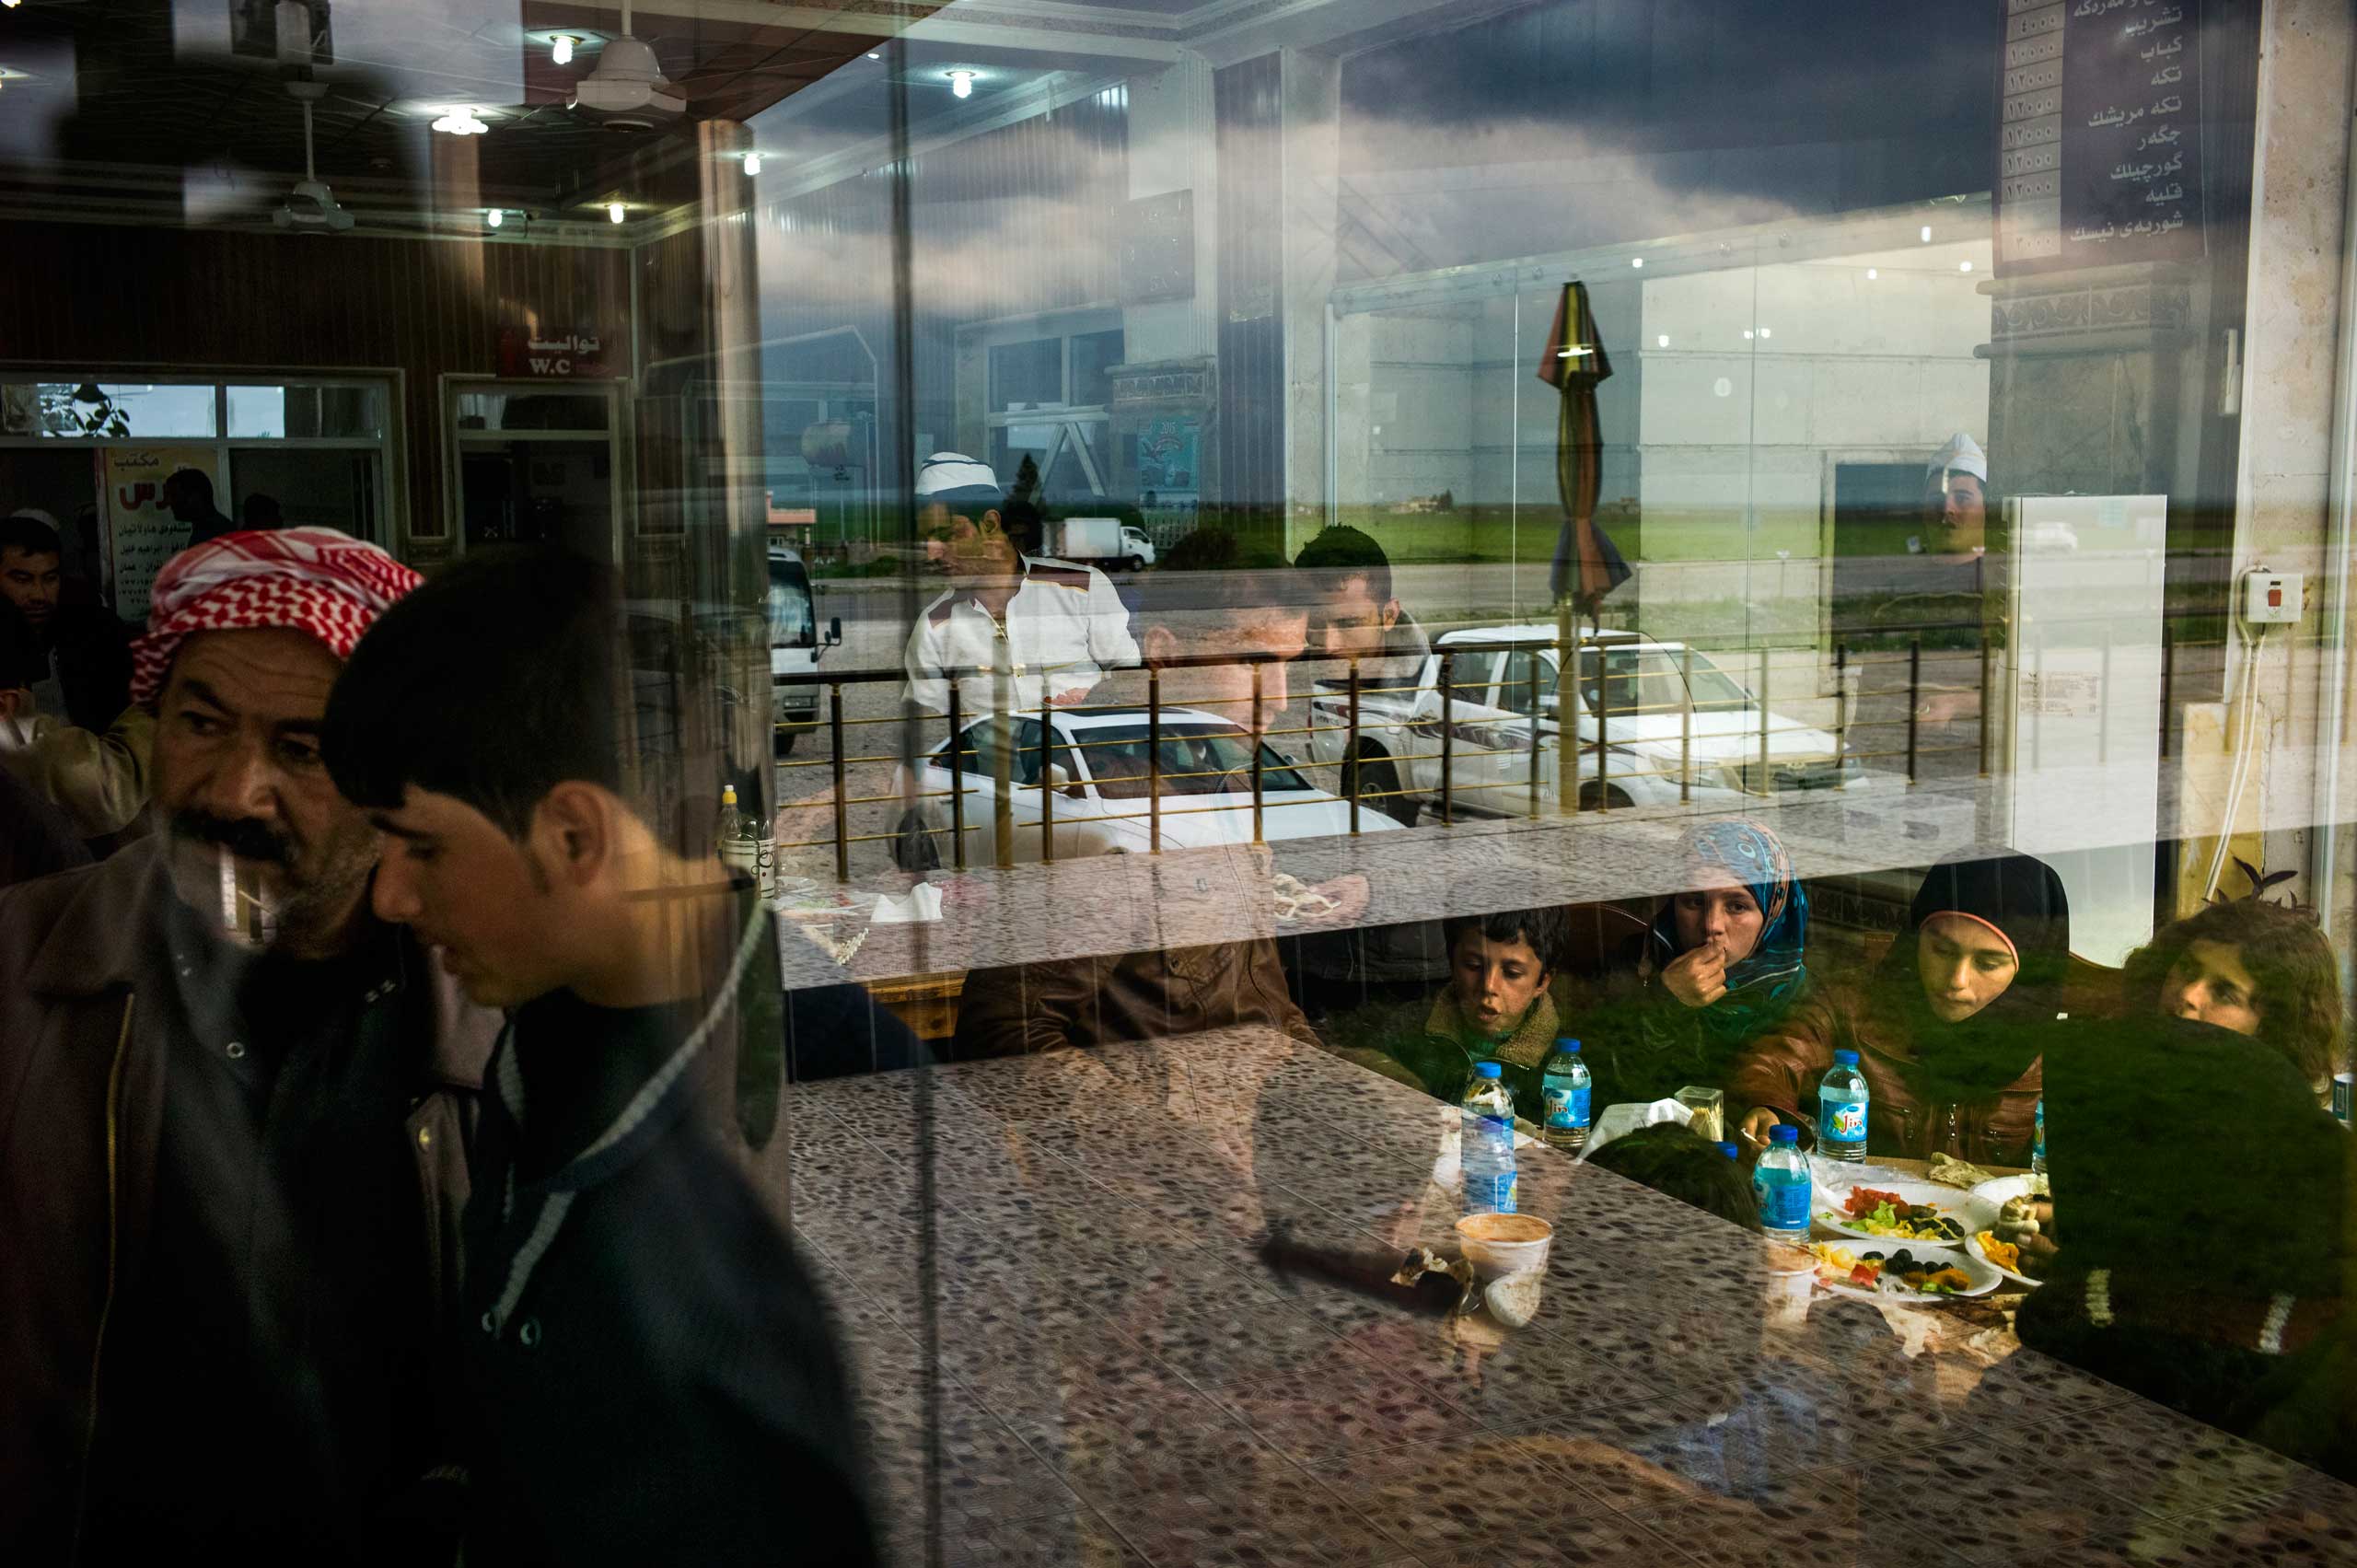 Nishan (centre) stays standing while he eats his lunch so that his sister-in-law and her children have a seat at the table in Amed Restaurant in Roviya. He and his family are traveling with over 300 other Syrian refugees from Kobani to the Gawilan Refugee camp in Iraq's Kurdistan. March 2015.